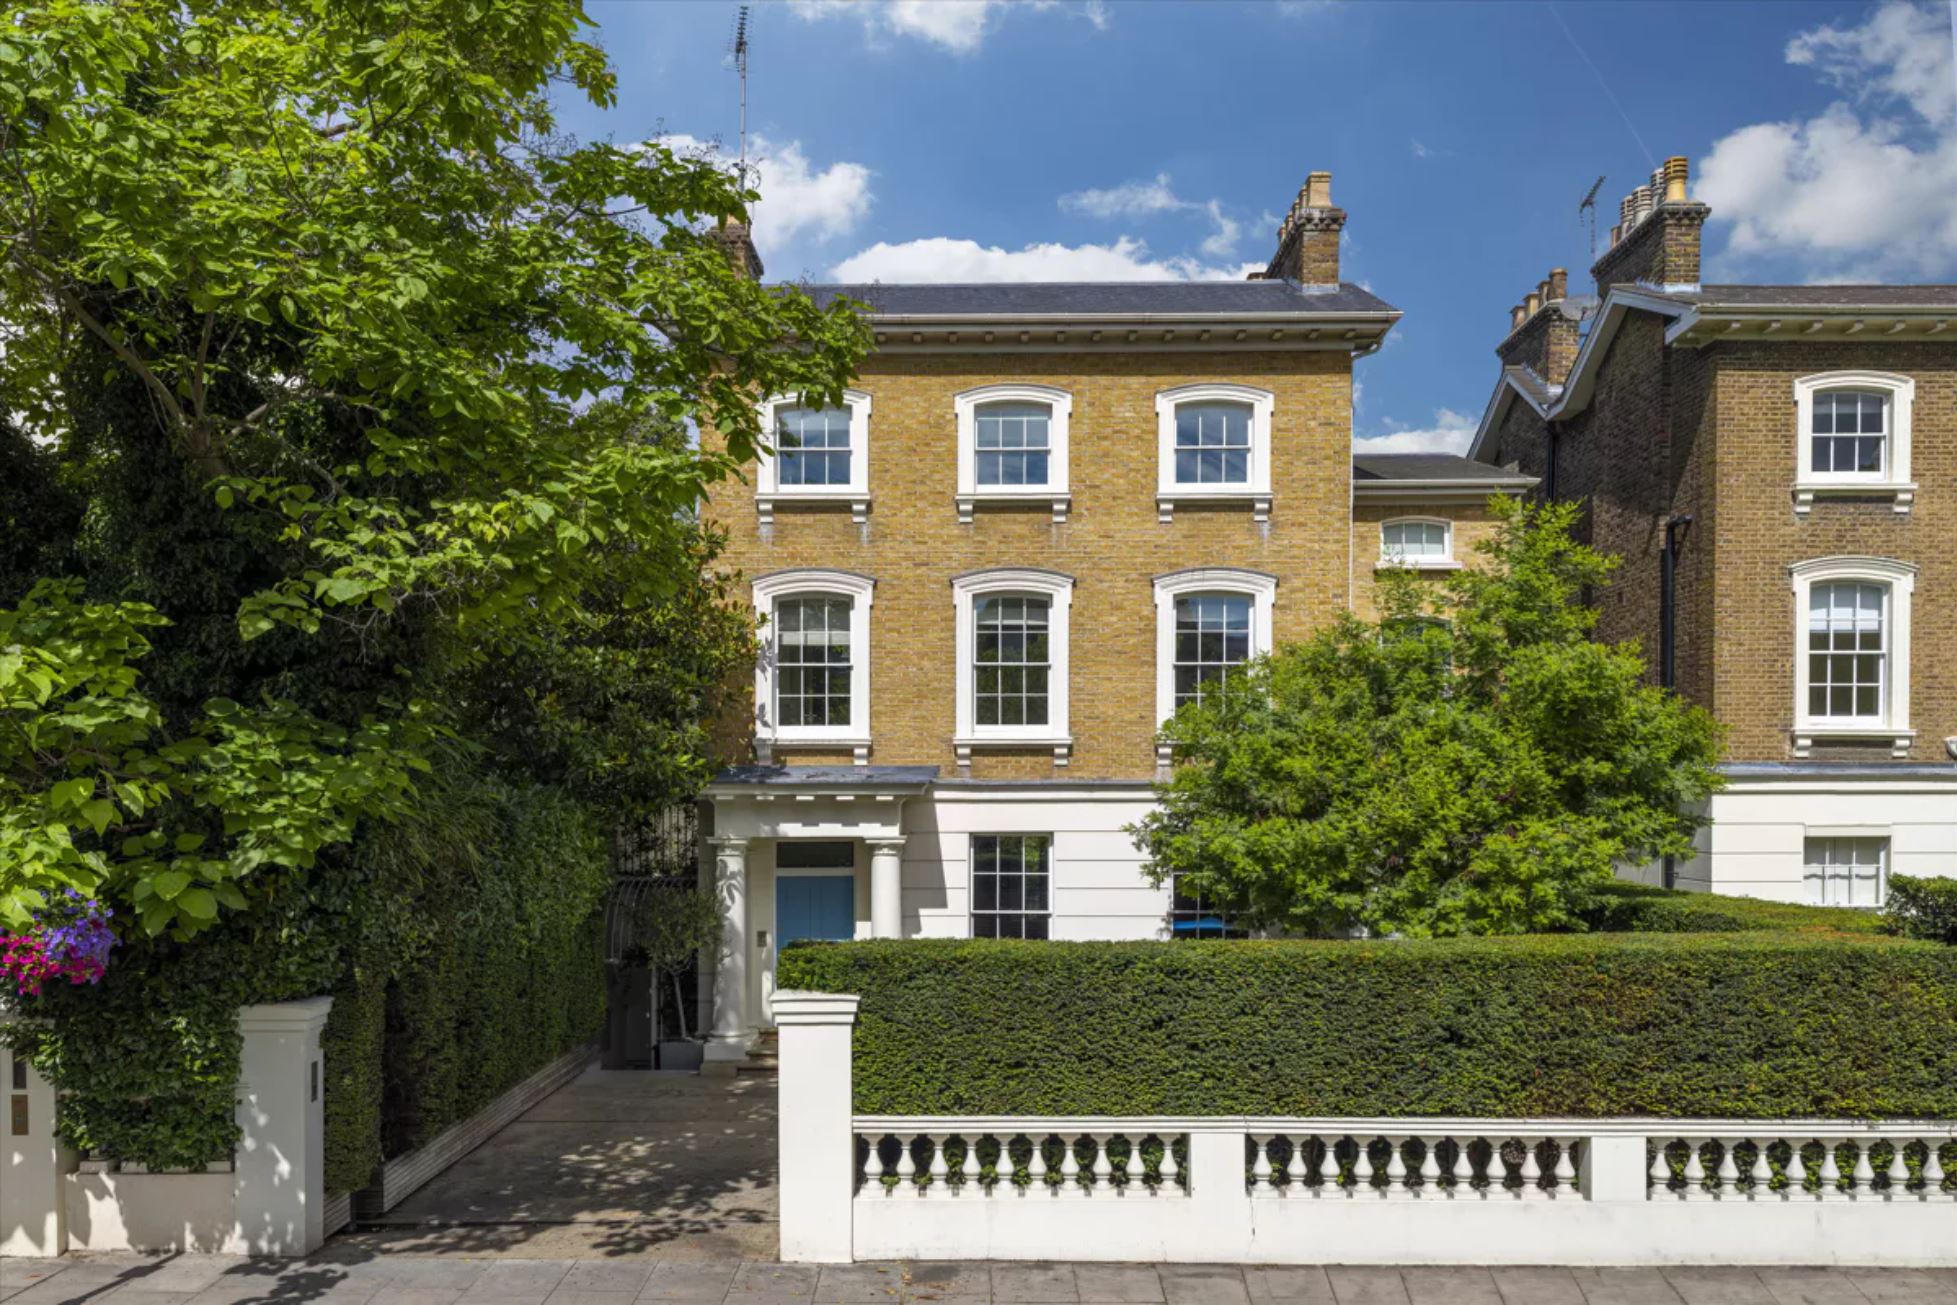 Exquisite living: London's most luxurious rentals available now